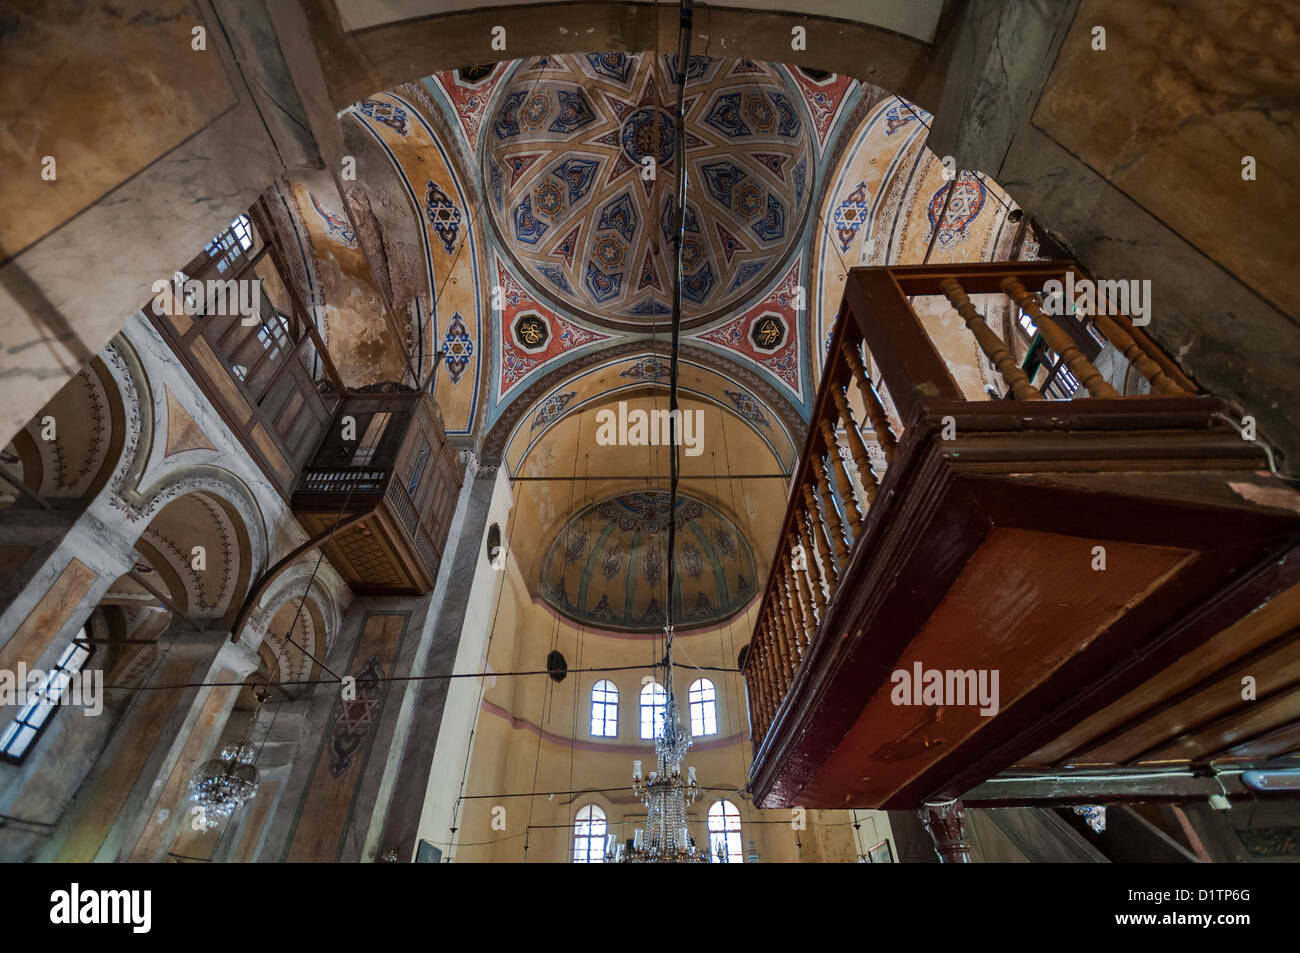 Gül Mosque (The Mosque of the Rose in English) is a former Eastern Orthodox church in Istanbul, Turkey. Stock Photo